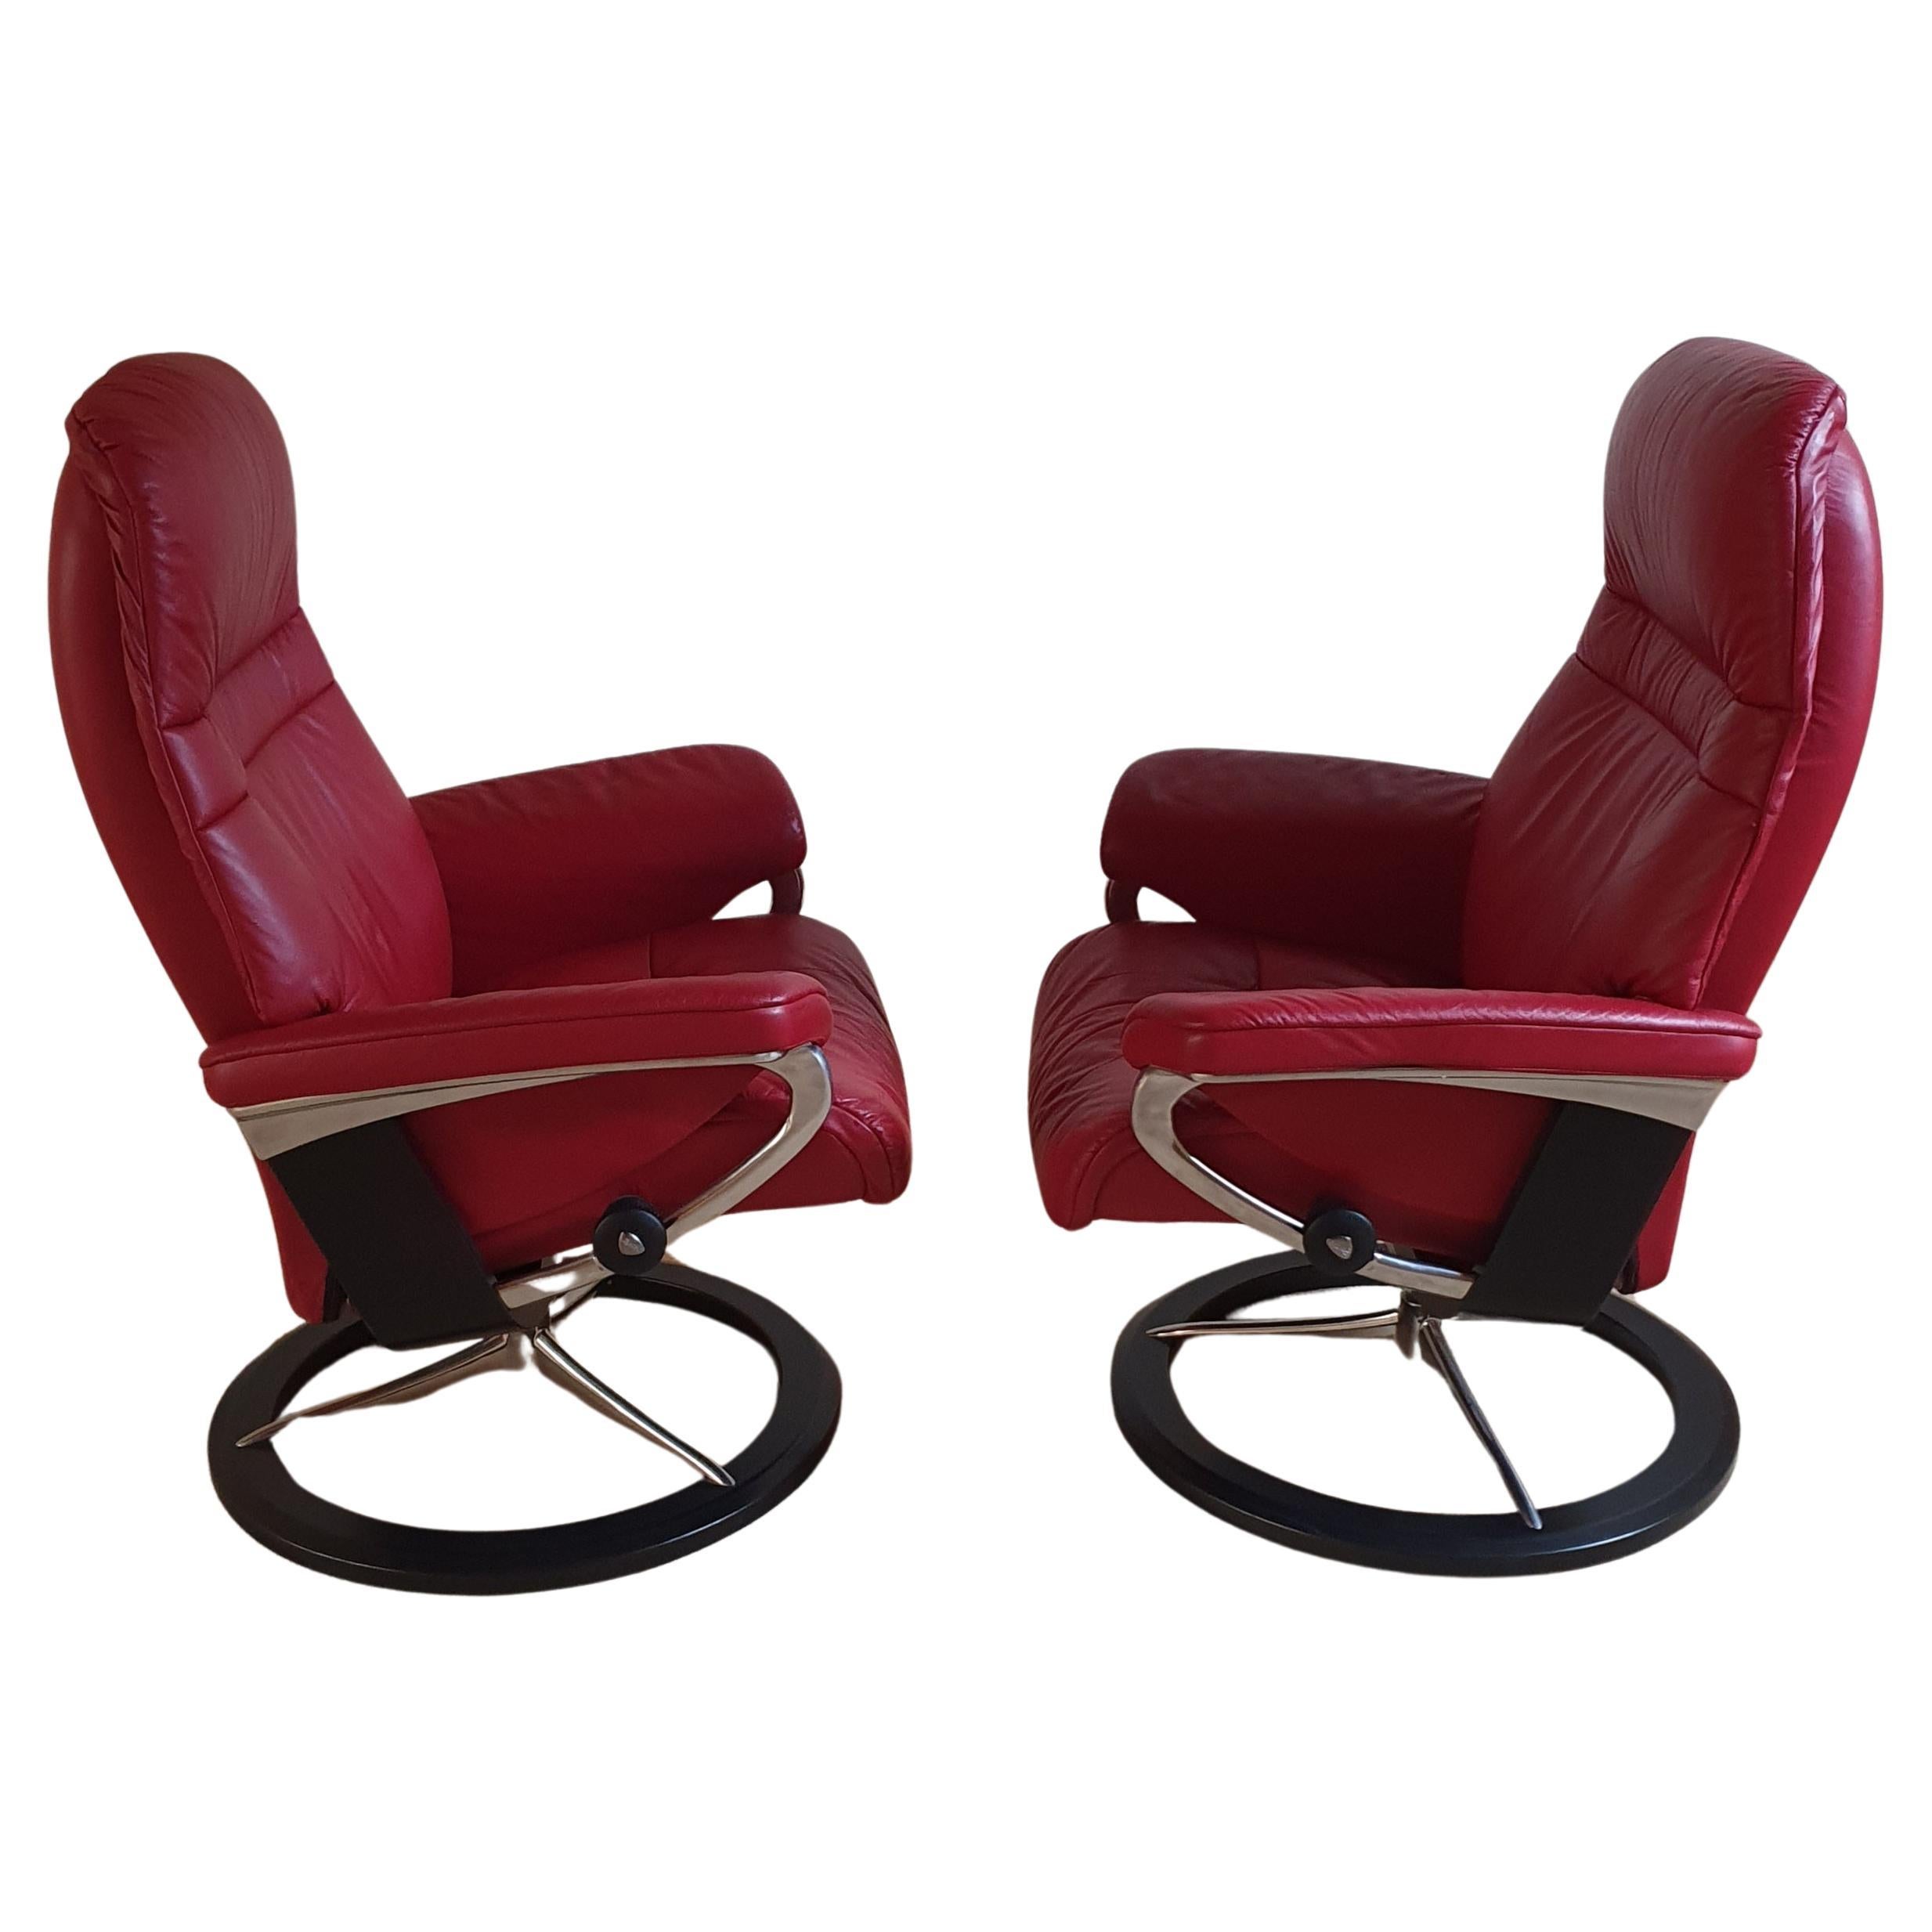 2 x Stressless Aura Recliner chairs with Signature in Cori leather Brick Red